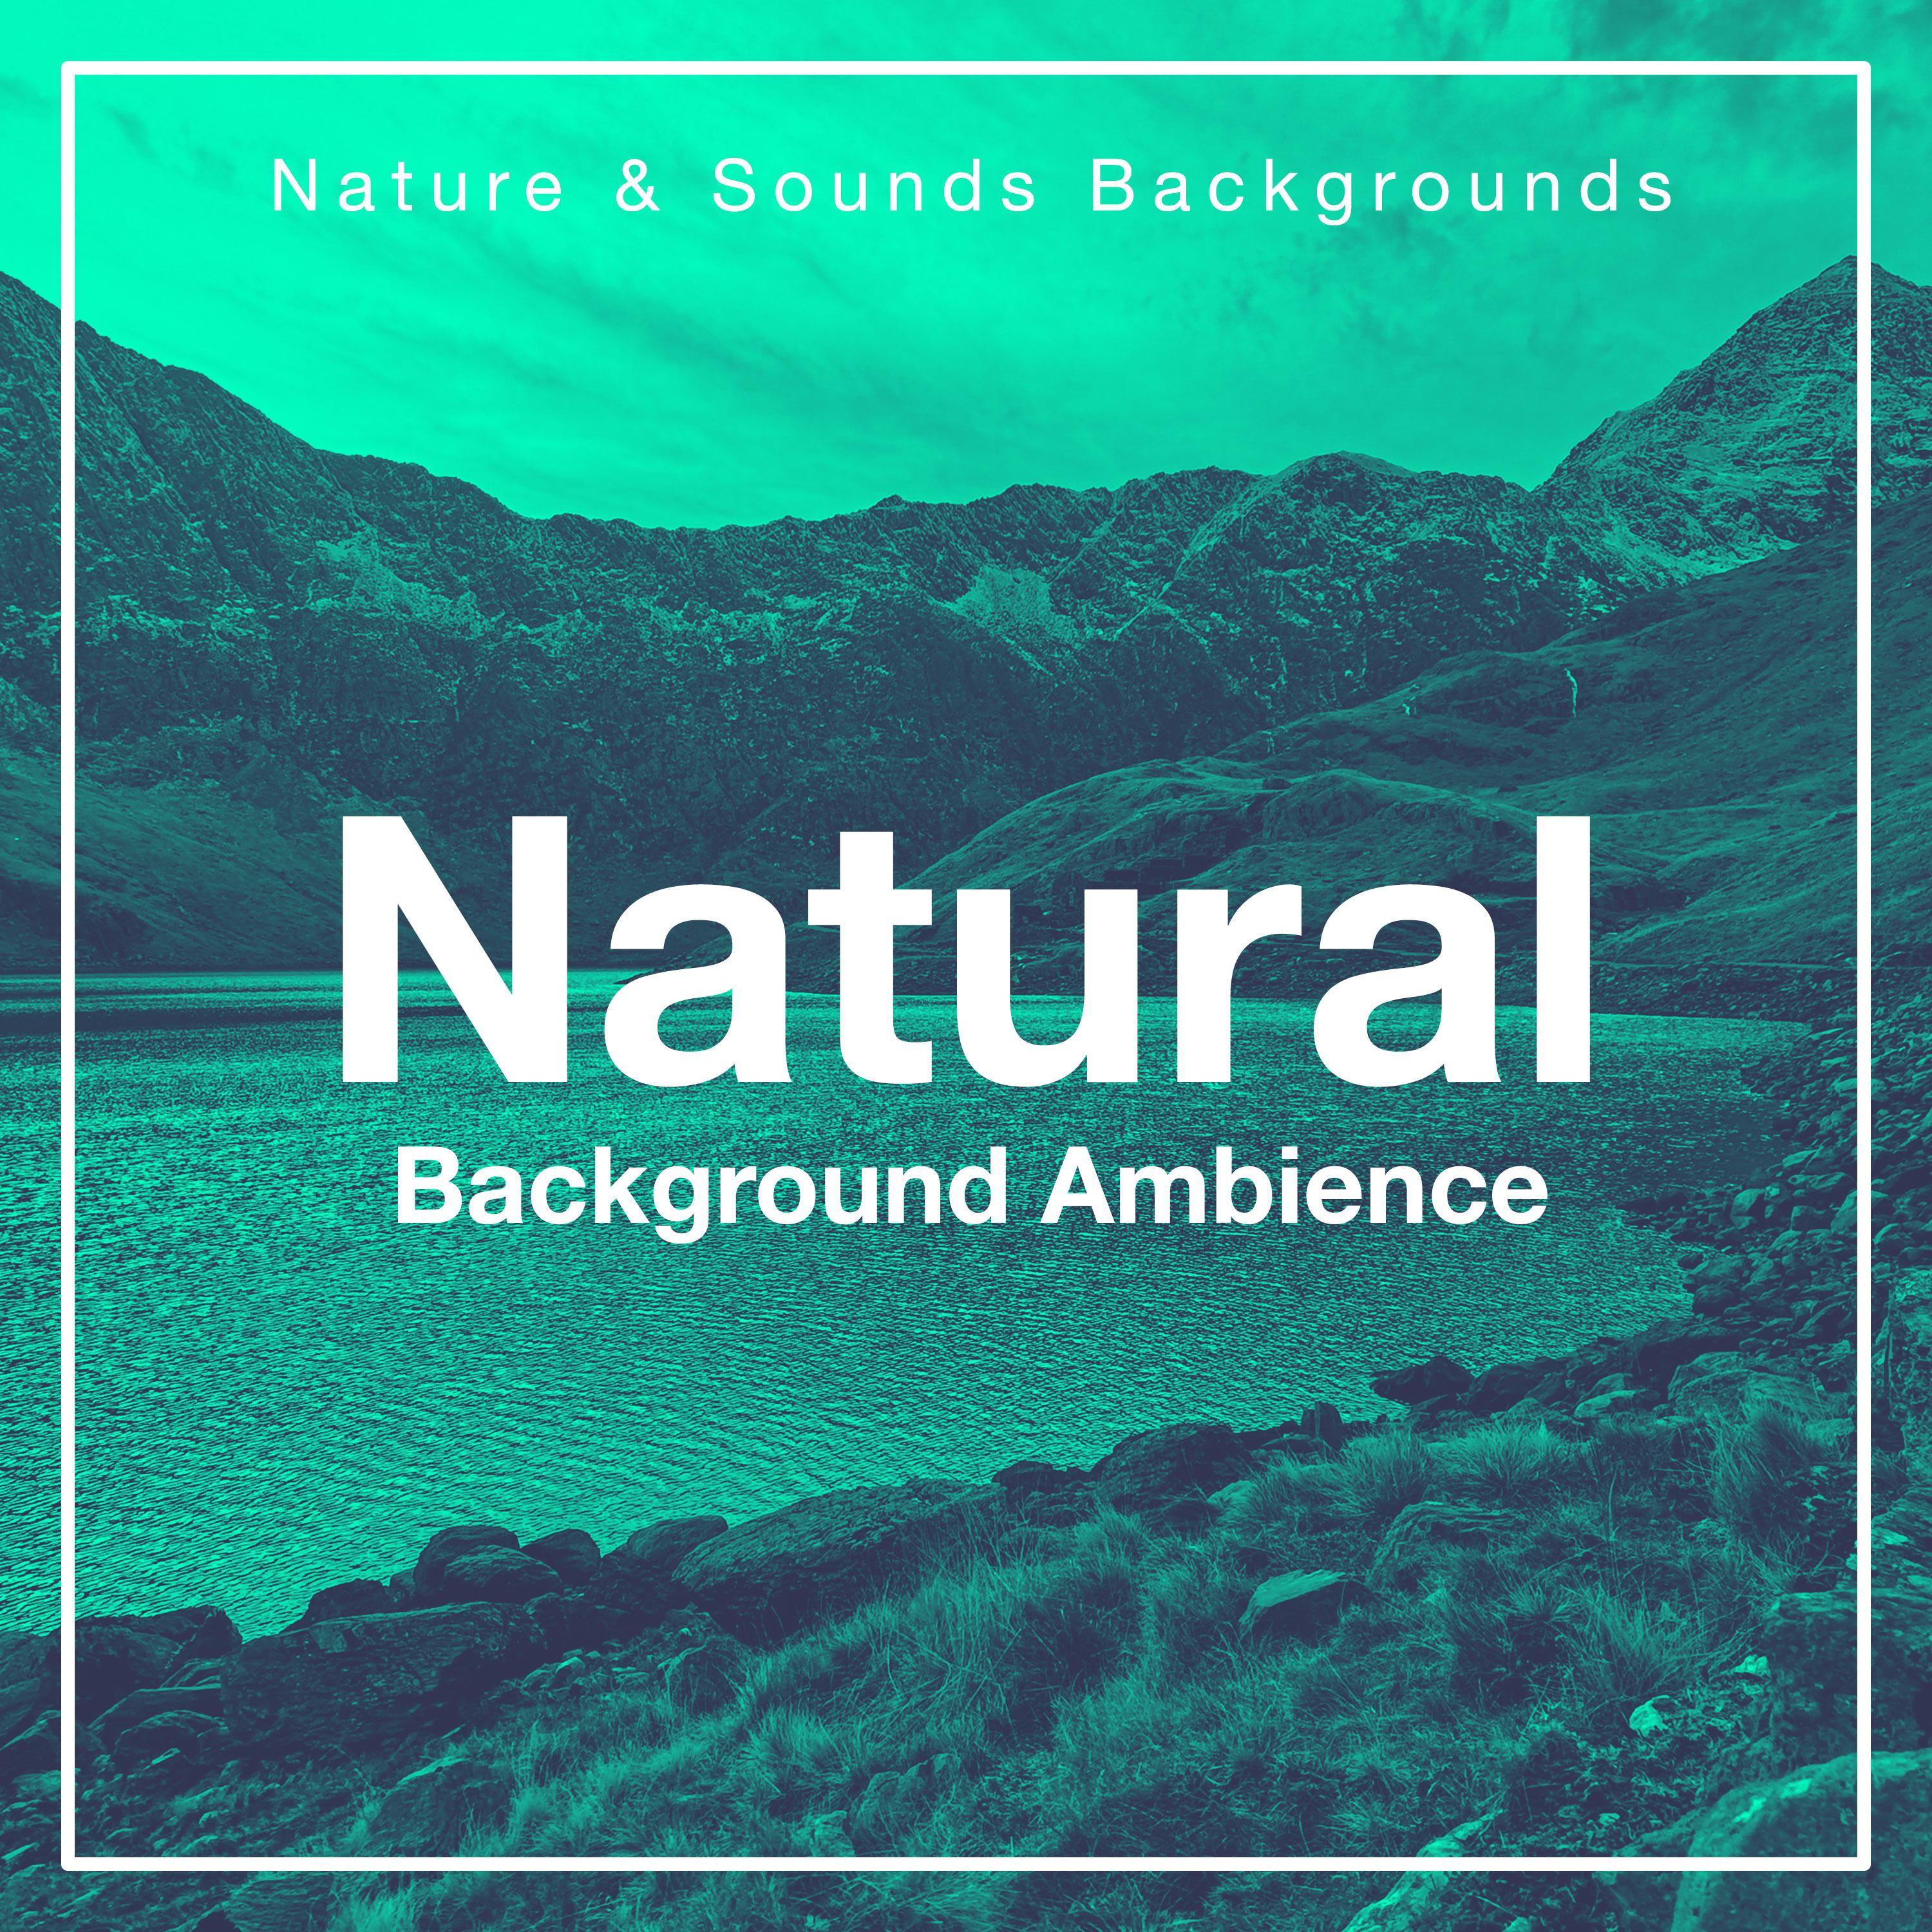 Natural Background Ambience